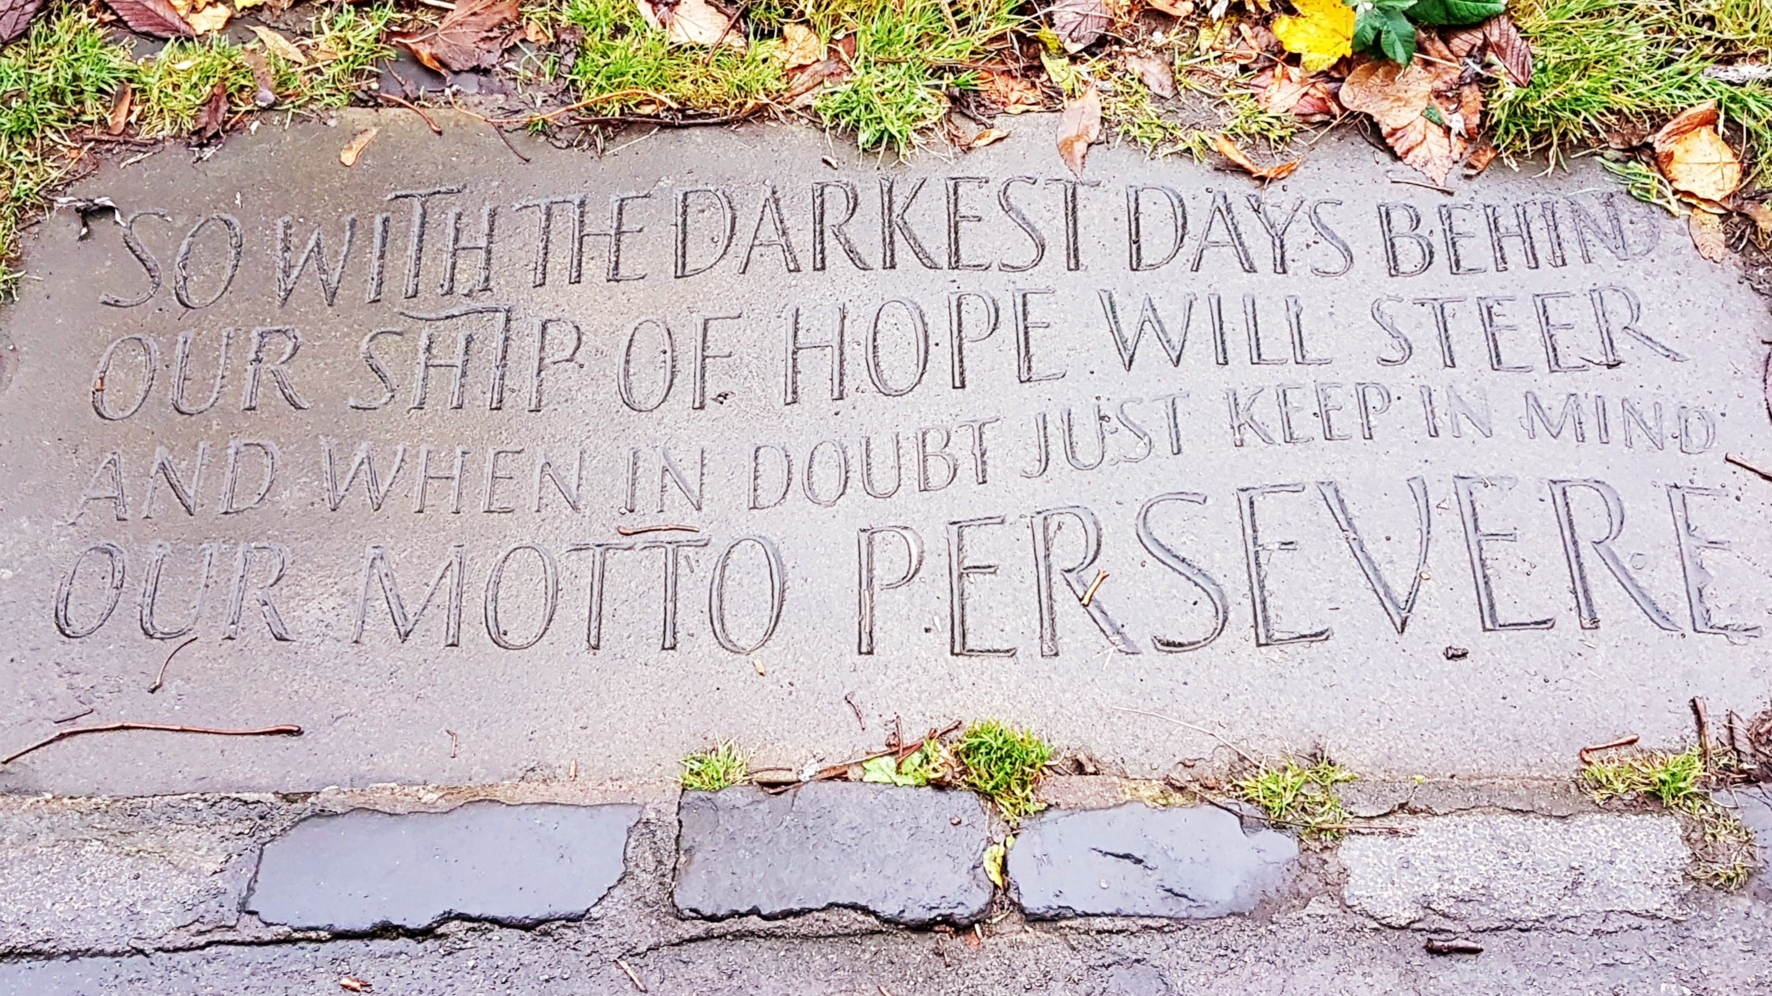 "Persevere" motto from the Water of Leith Walkway © 2020 Gordon Munro